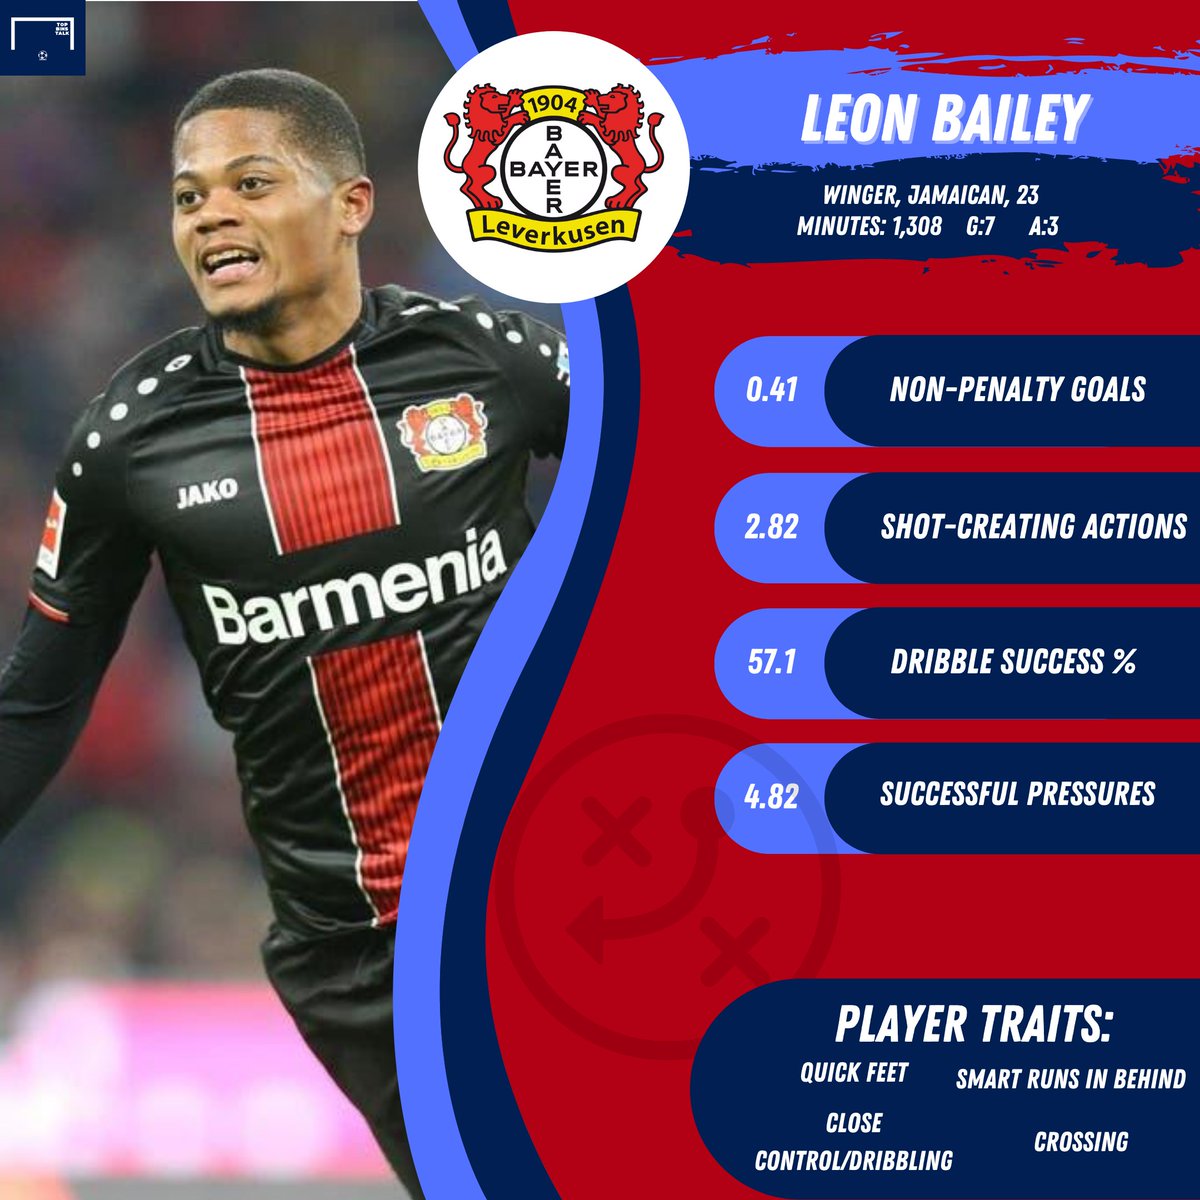 Realistic: Leon BaileyThe dynamic, pacey, and skillful winger has been linked to United in recent times, and for good reason. He's endured a few frustrating campaigns but is equally adept on both wings, has a rocket of a shot, and is very dangerous on the dribble.